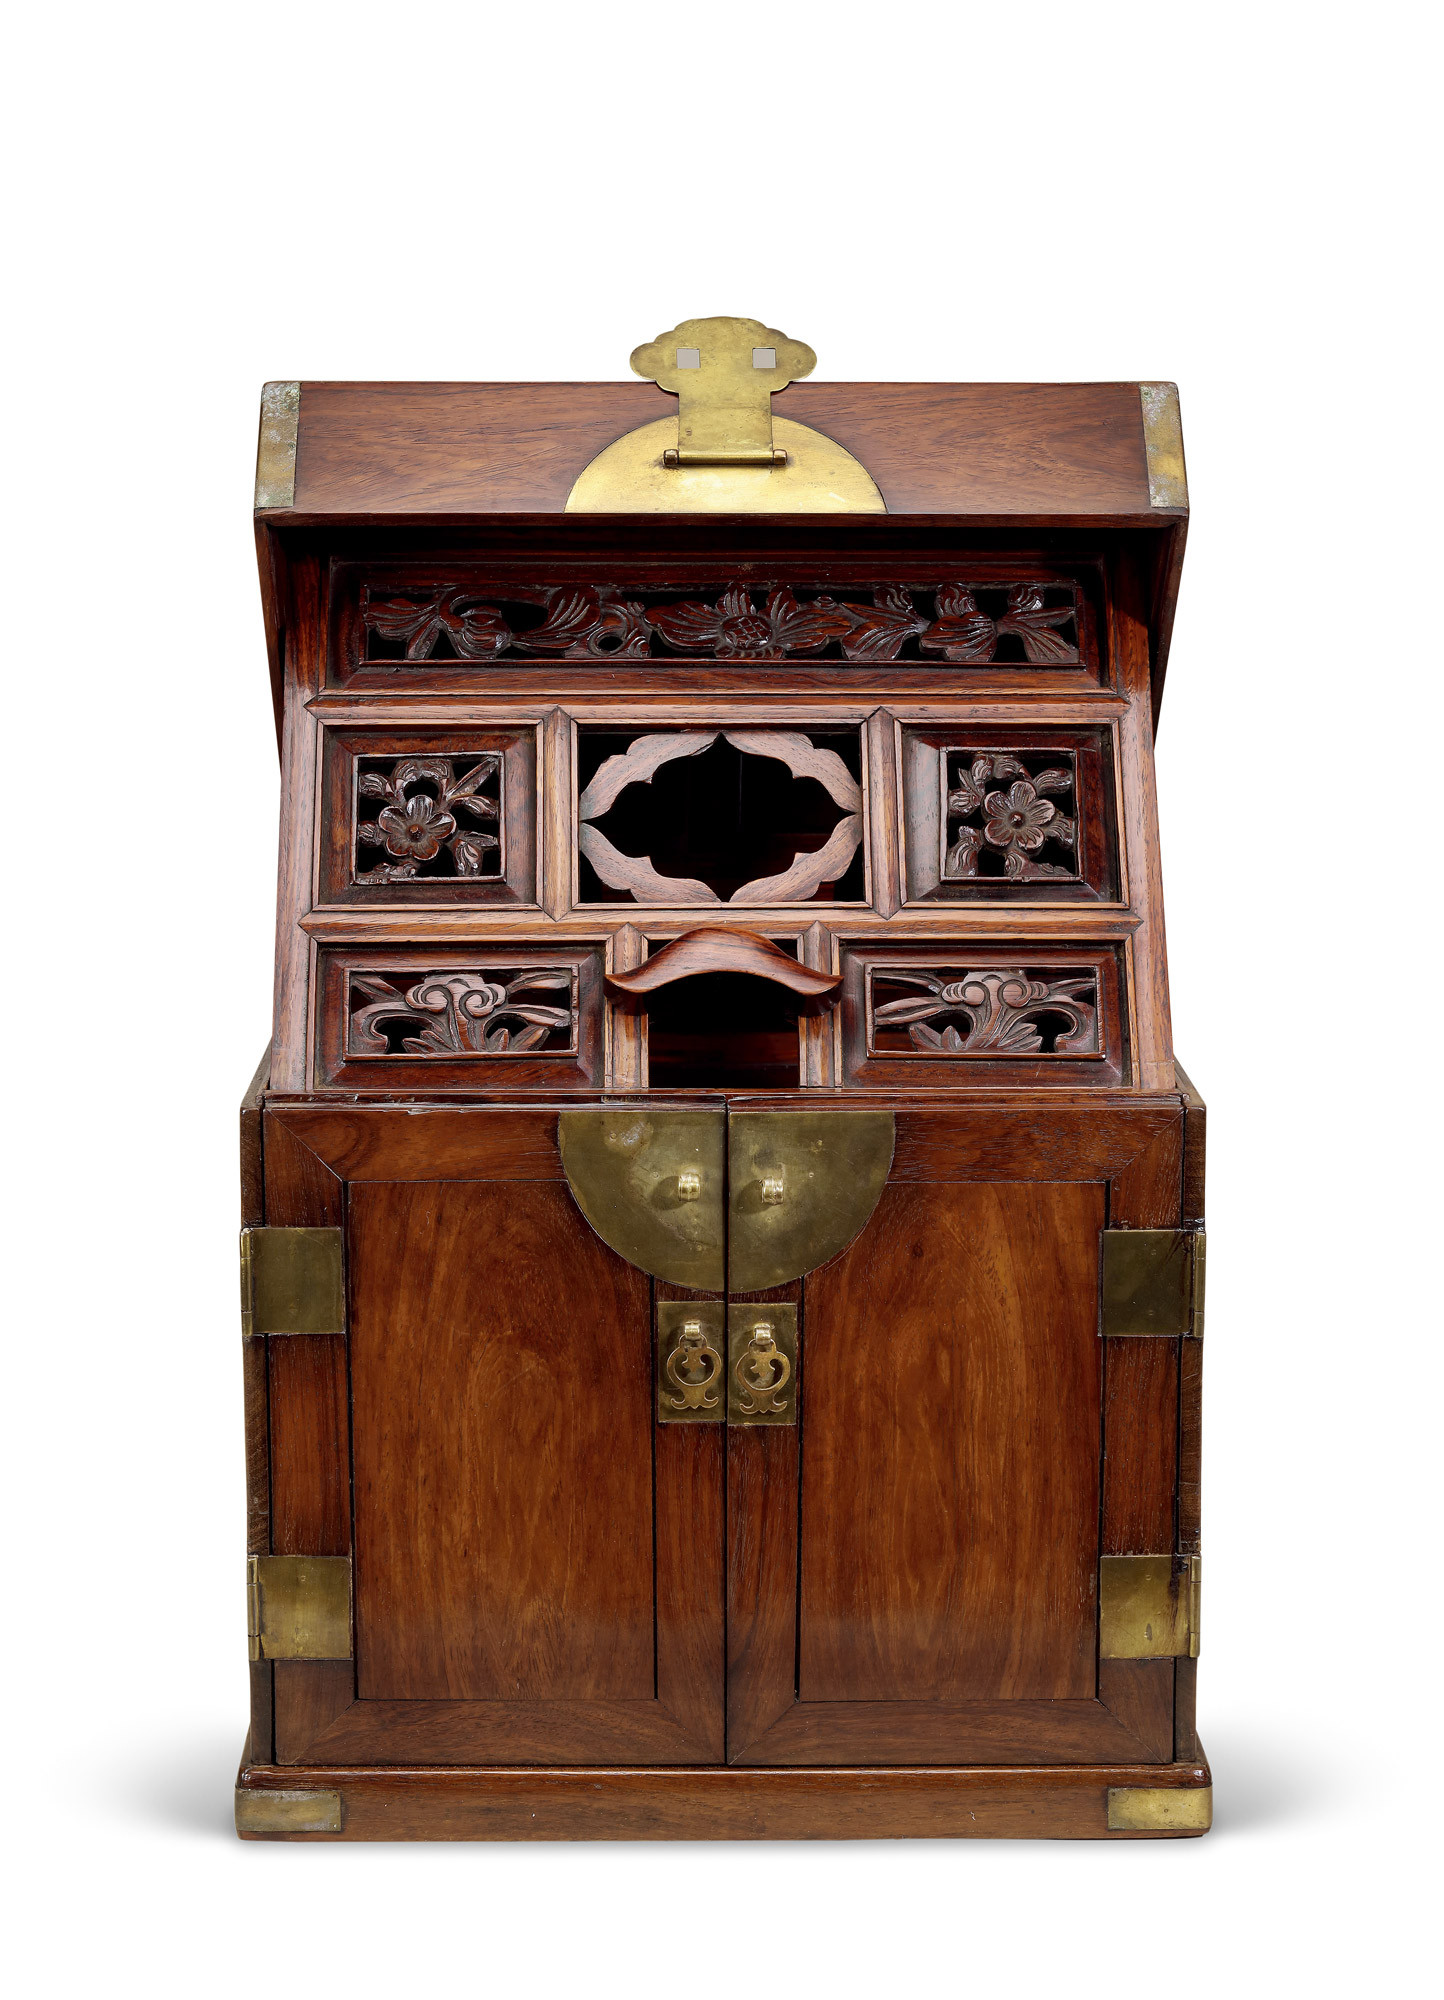 A Huanghuali Case with Mirror Stand